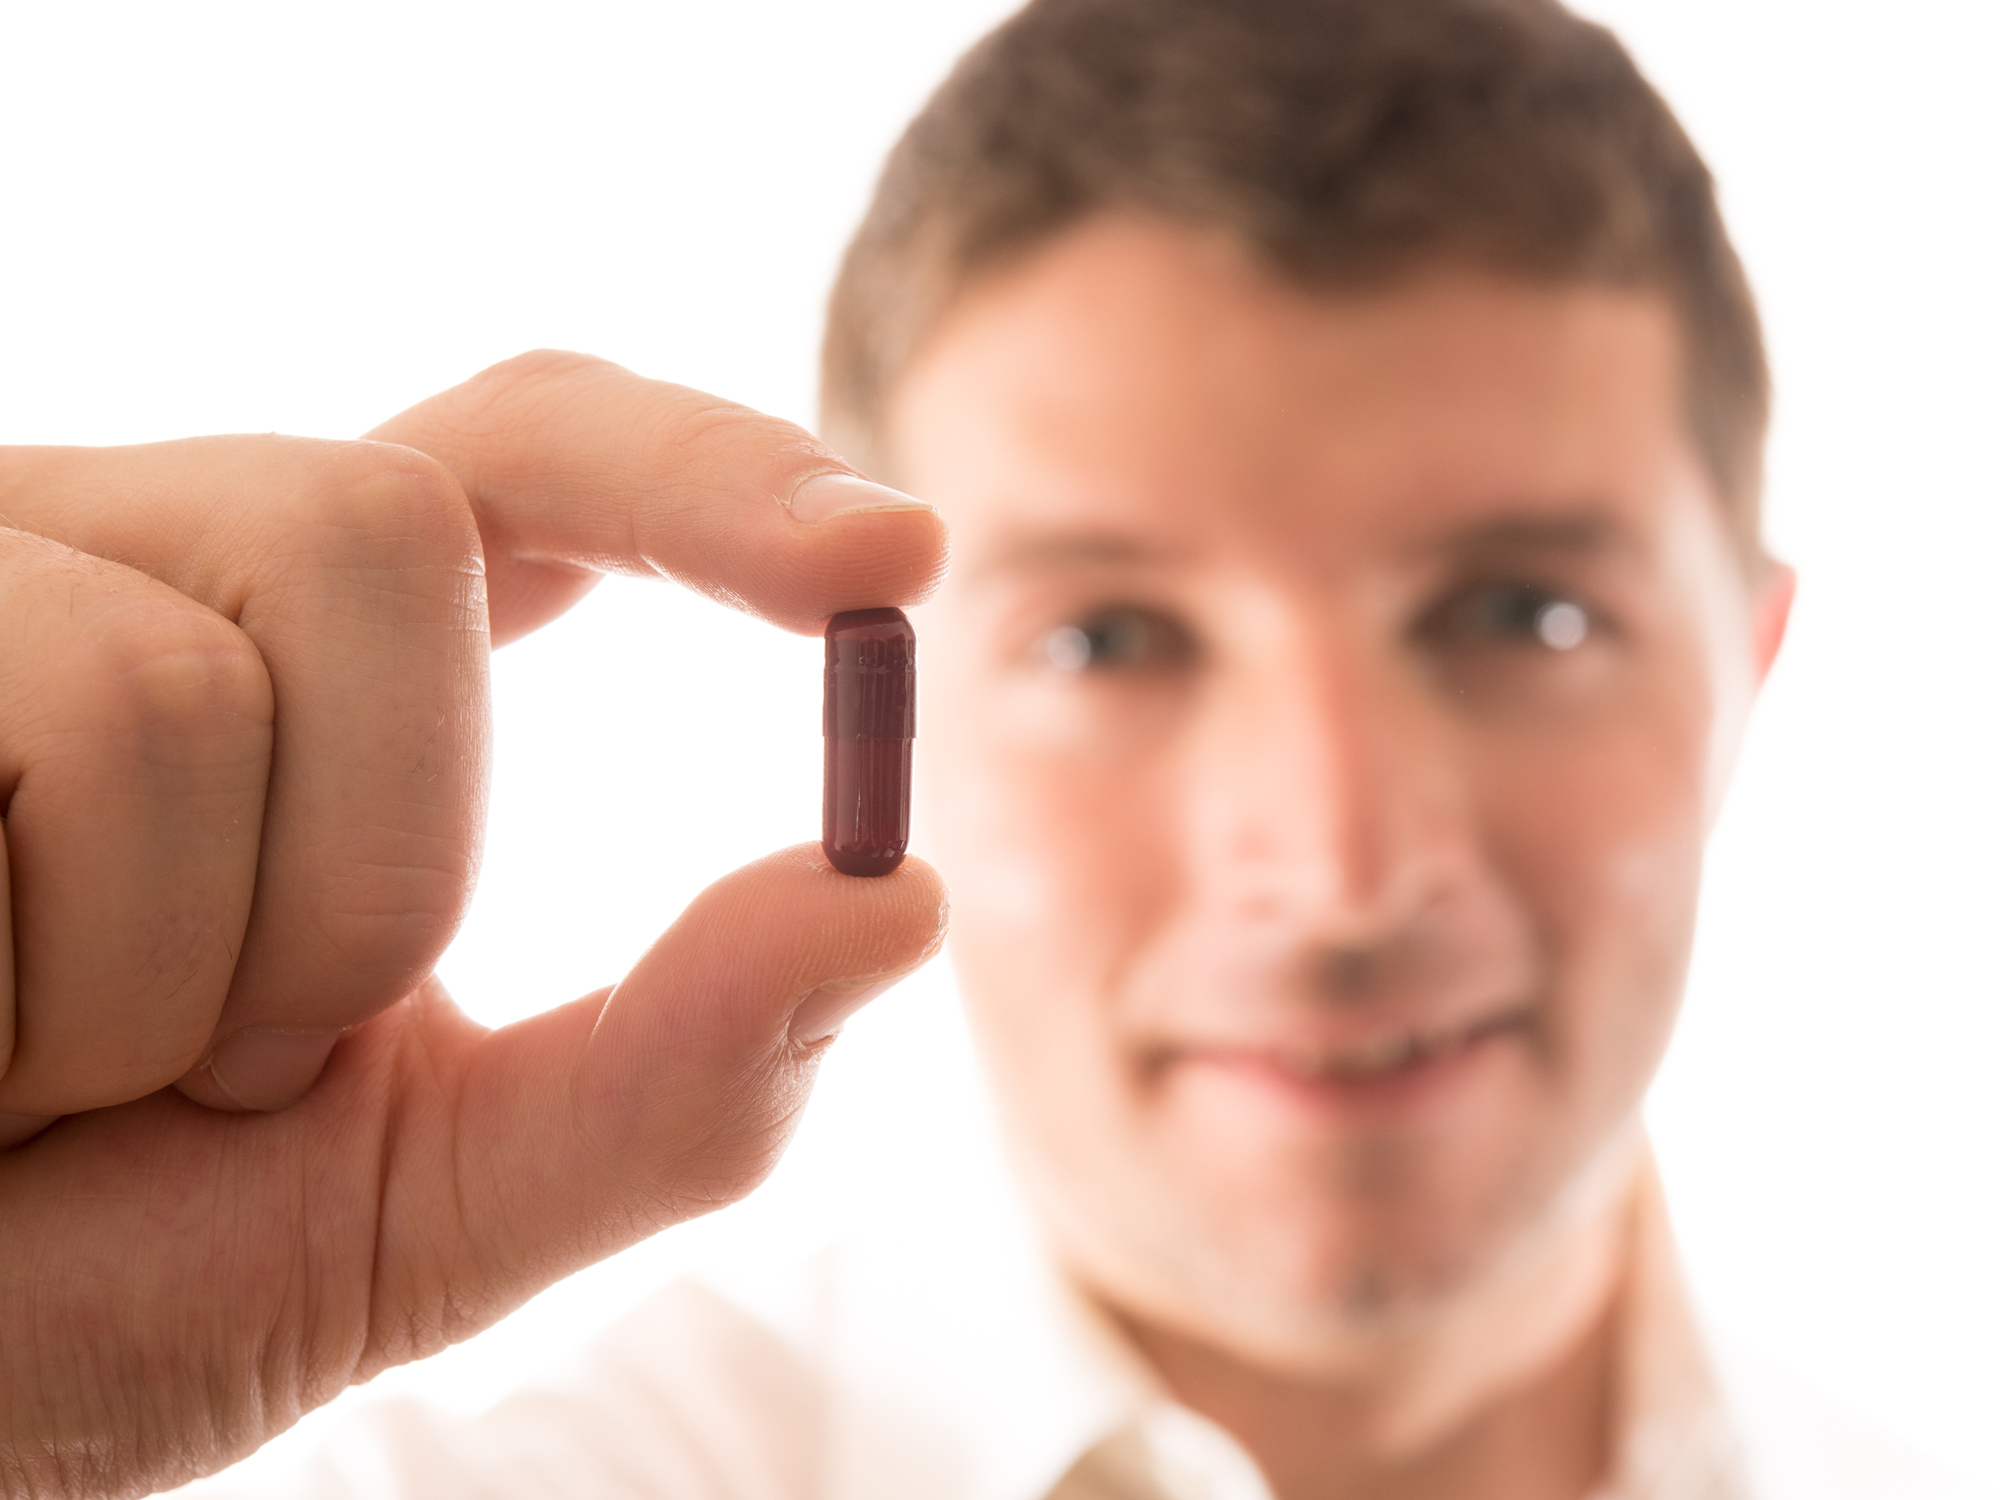 Can you trust the claims testosterone supplements make?